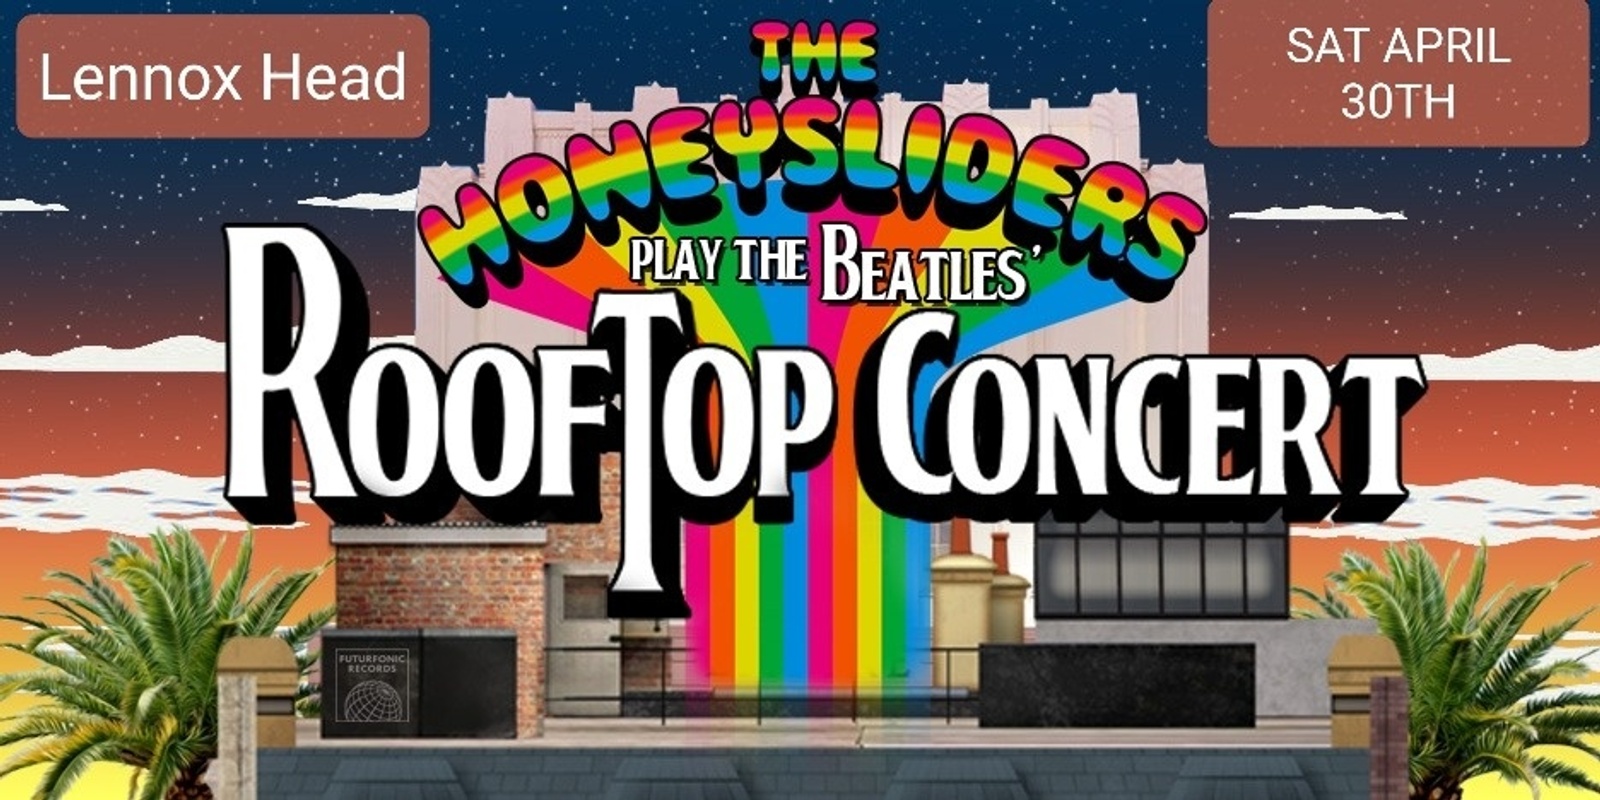 Banner image for Beatles Rooftop Concert  with "THE HONEYSLIDERS"